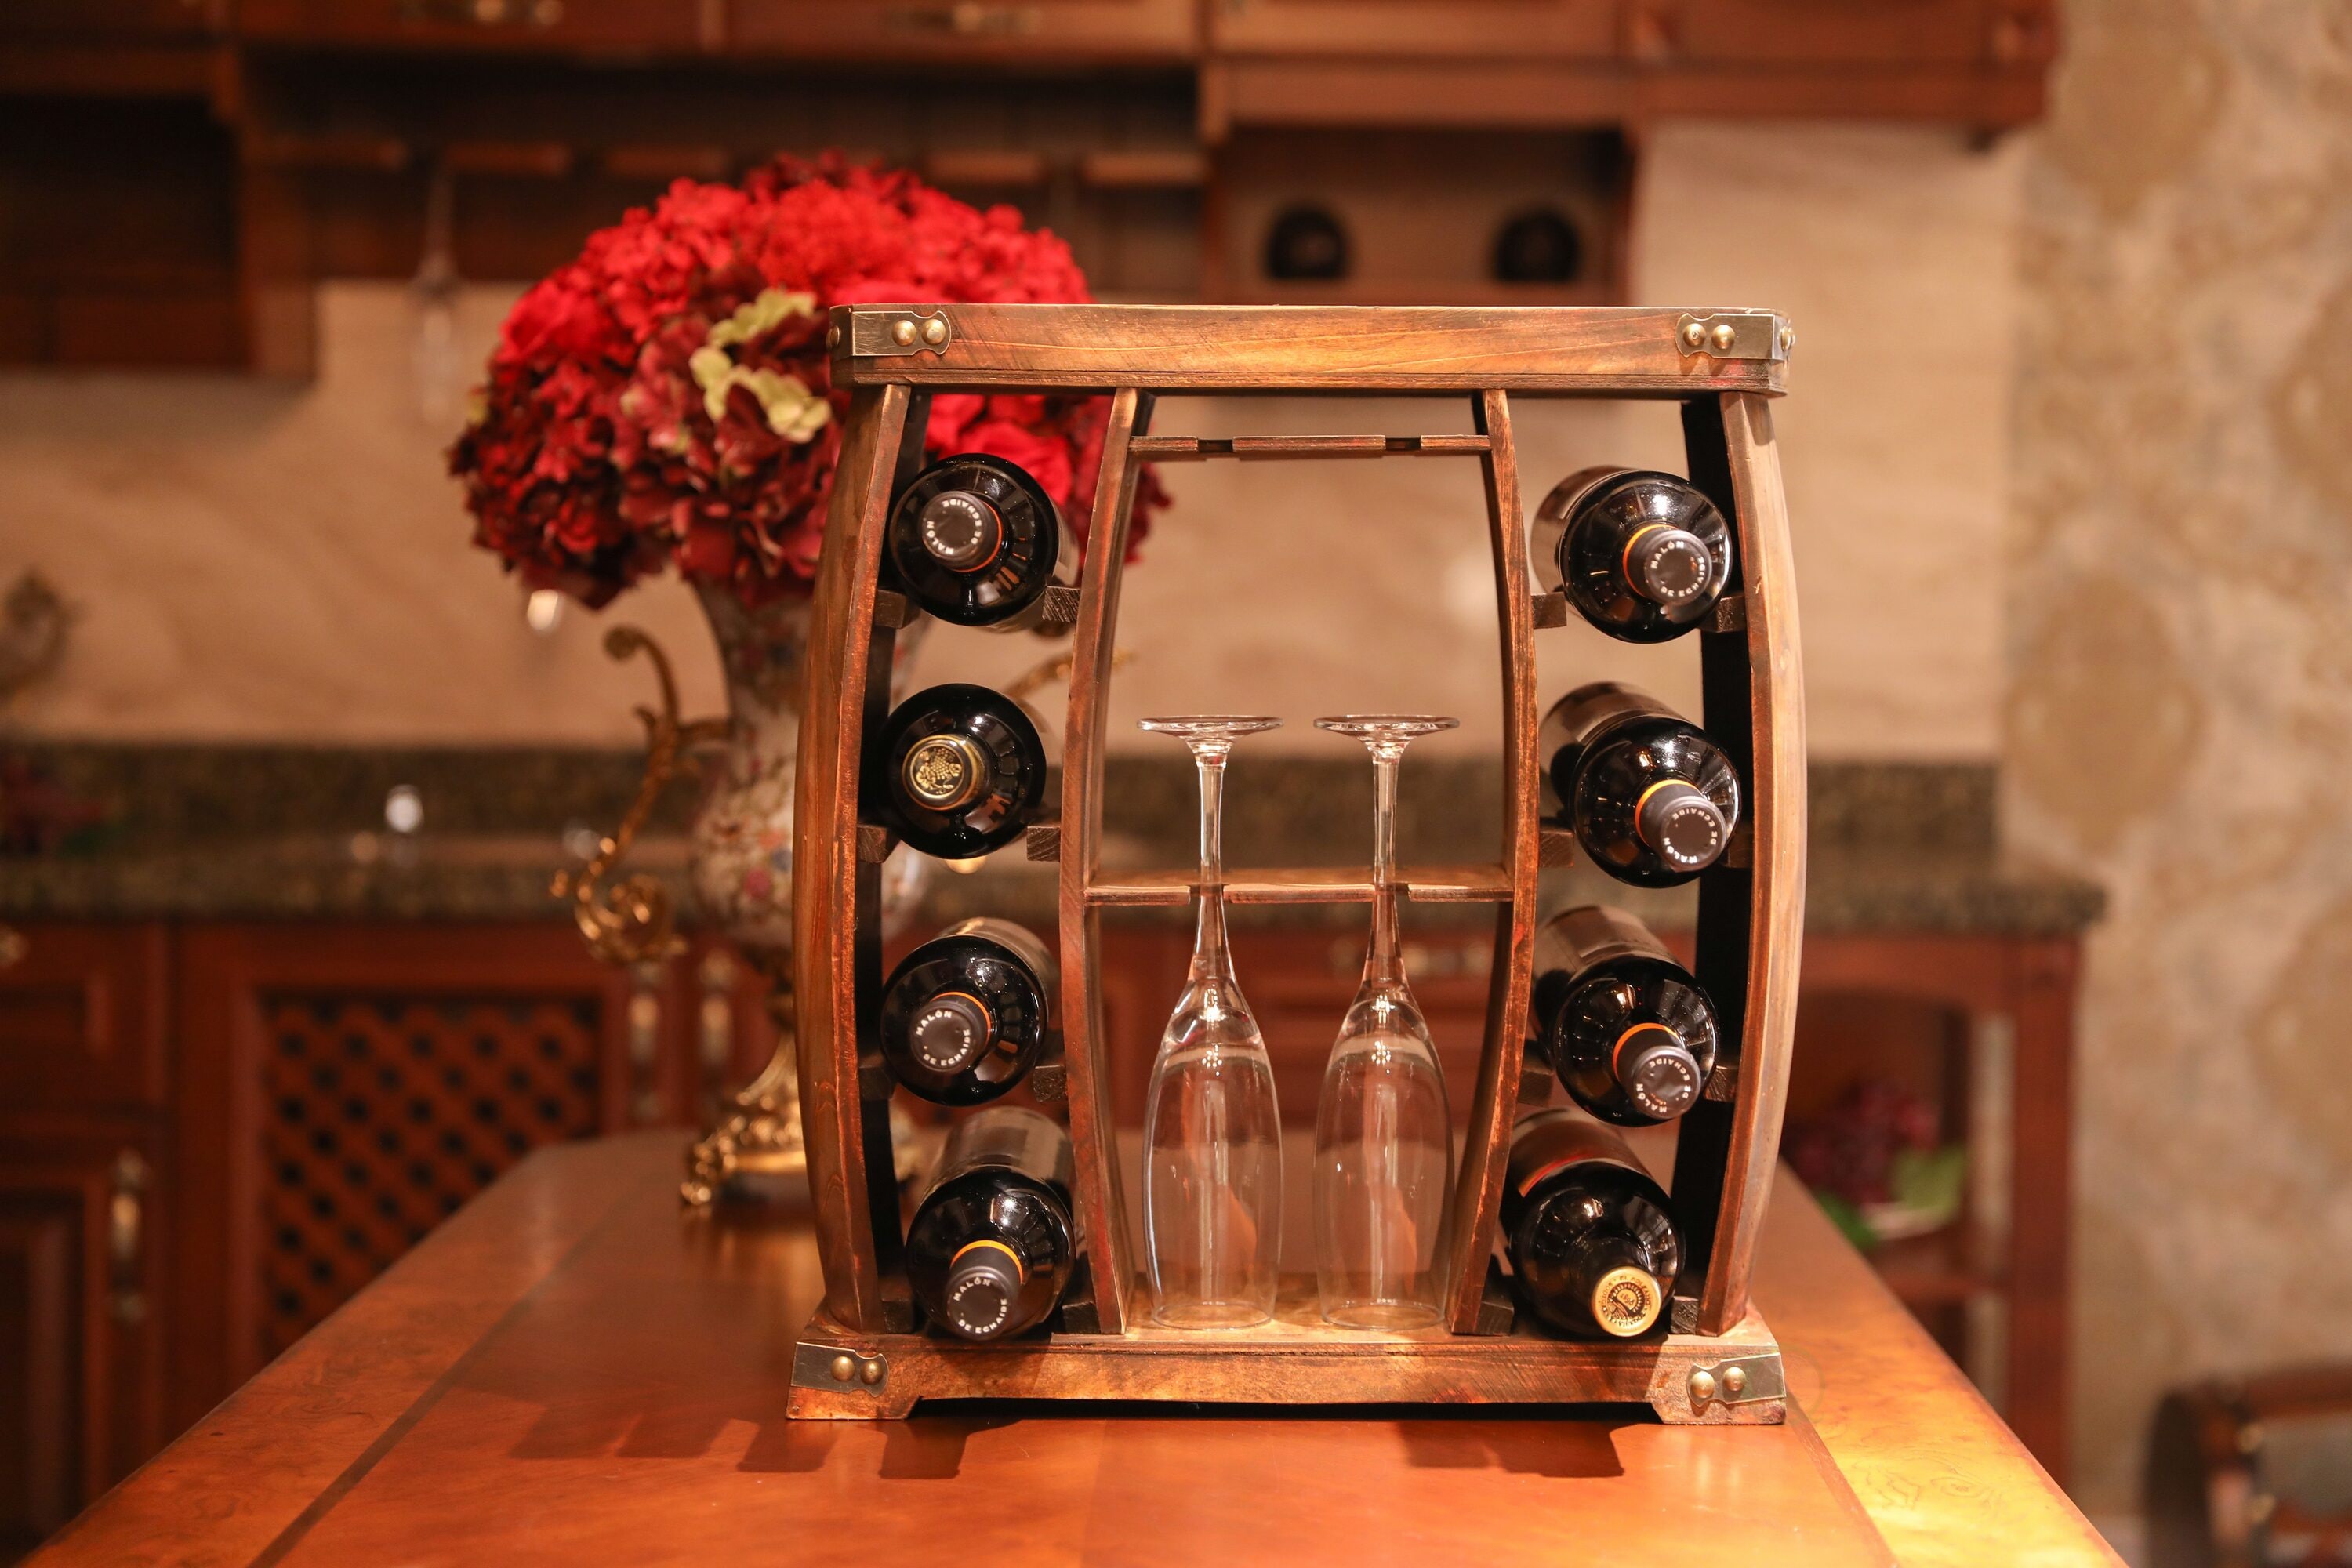 5 Five Simply Smart Tabletop Wooden Wine Rack for 8 Bottles Brown  46.5x16.5x32cm